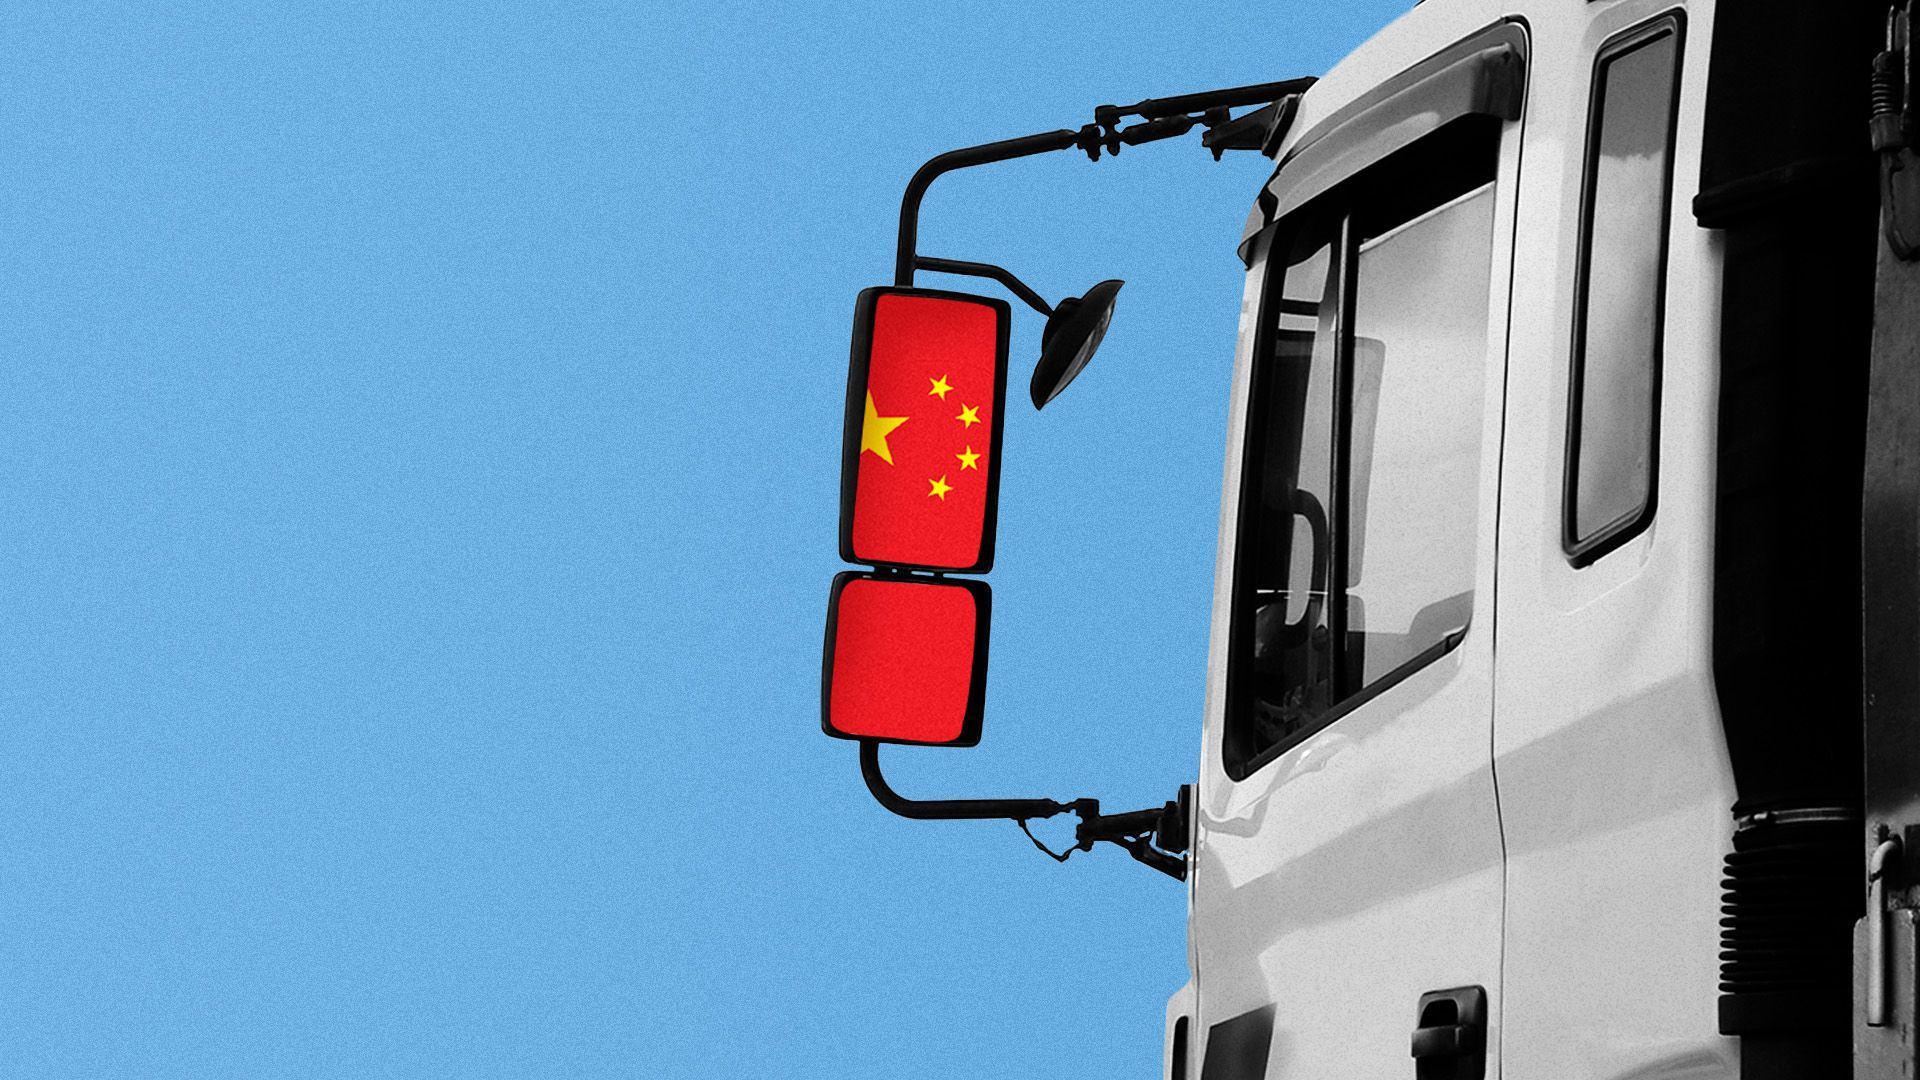 Illustration of a tractor trailer with a Chinese flag reflected in the side mirrors